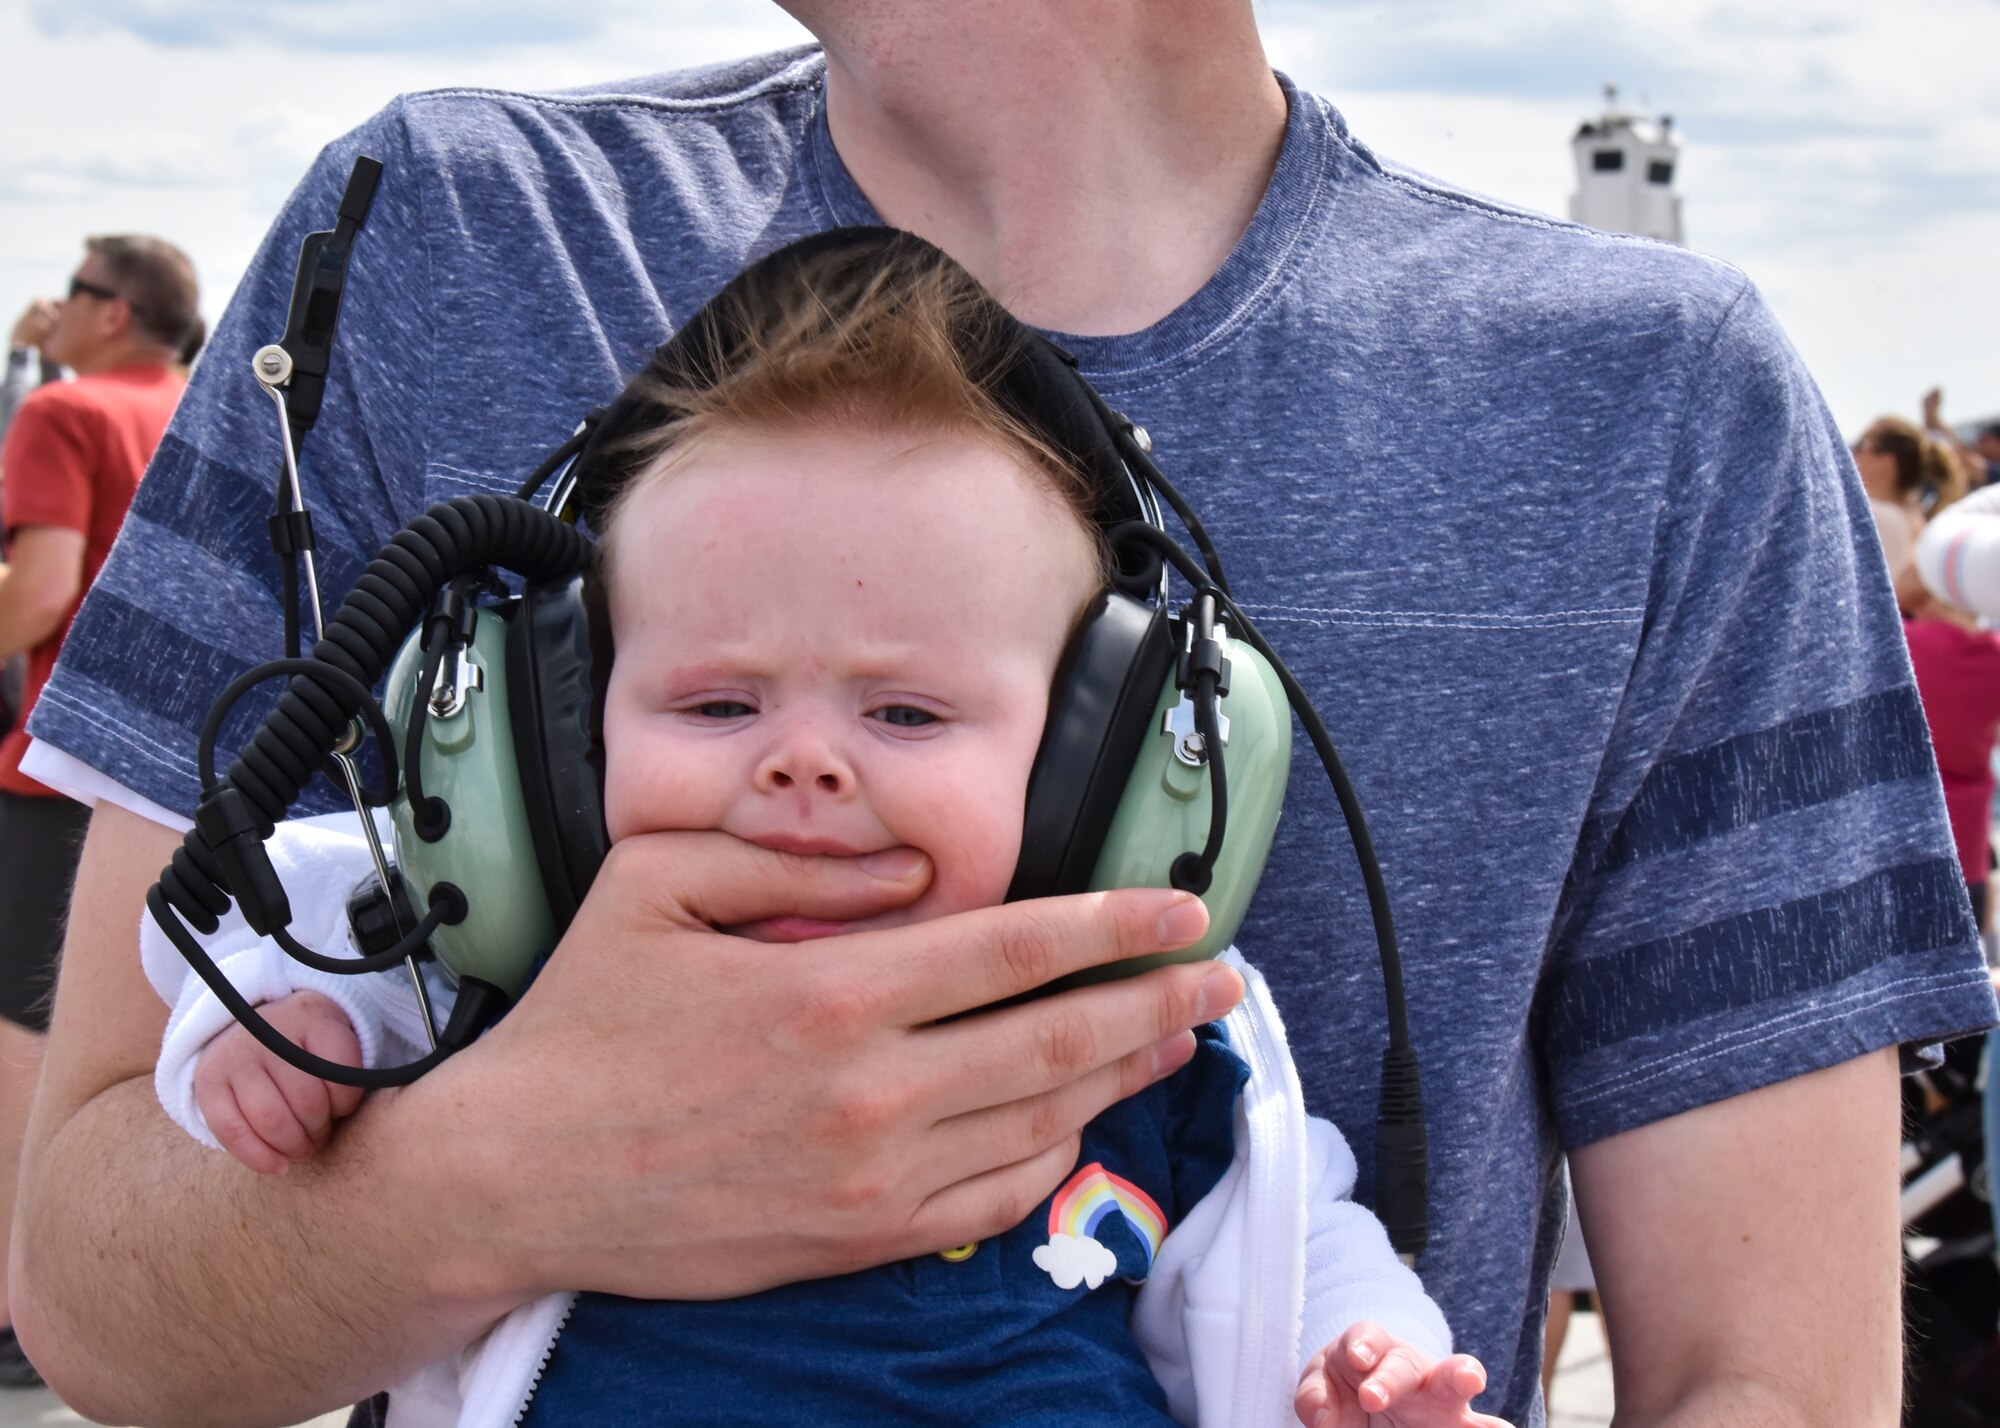 A baby chews on her father’s hand at the 2019 Skyfest Open House and Airshow on Fairchild Air Force Base, Washington, June 22, 2019. Skyfest 2019 gave the Inland Northwest a chance to meet members of Team Fairchild and see the U.S. Air Force’s premier air refueling wing in action during a simulated KC-135 Stratotanker low-pass refuel of a C-17 Globemaster III. (U.S. Air Force photo by Airman Kiaundra Miller)